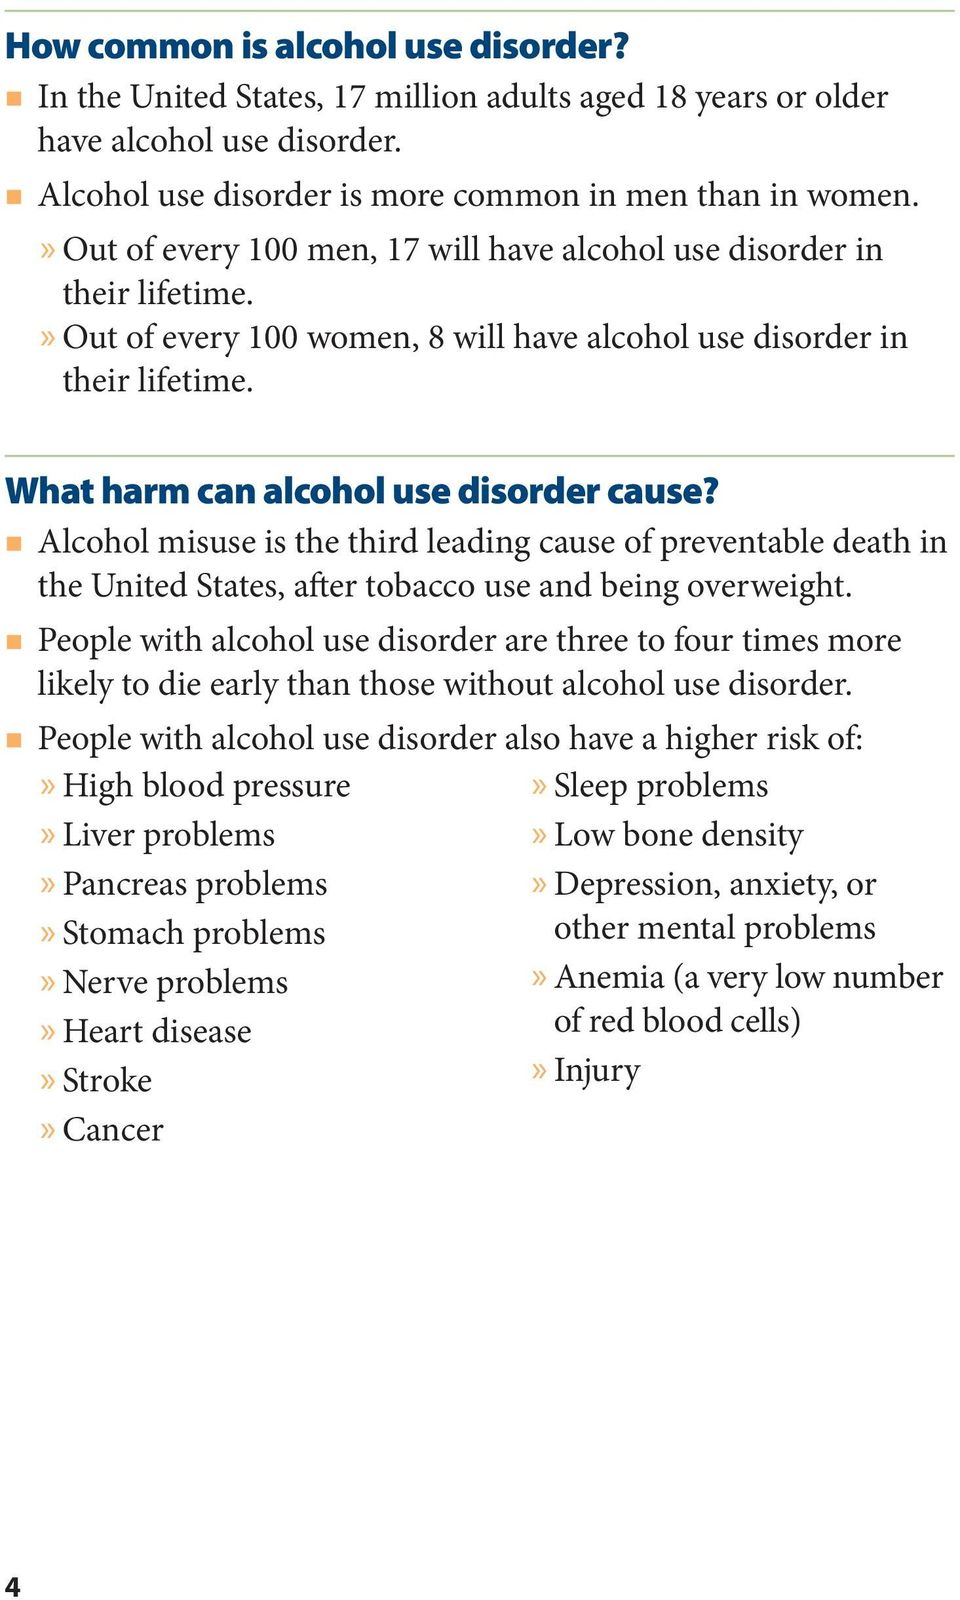 Alcohol misuse is the third leading cause of preventable death in the United States, after tobacco use and being overweight.